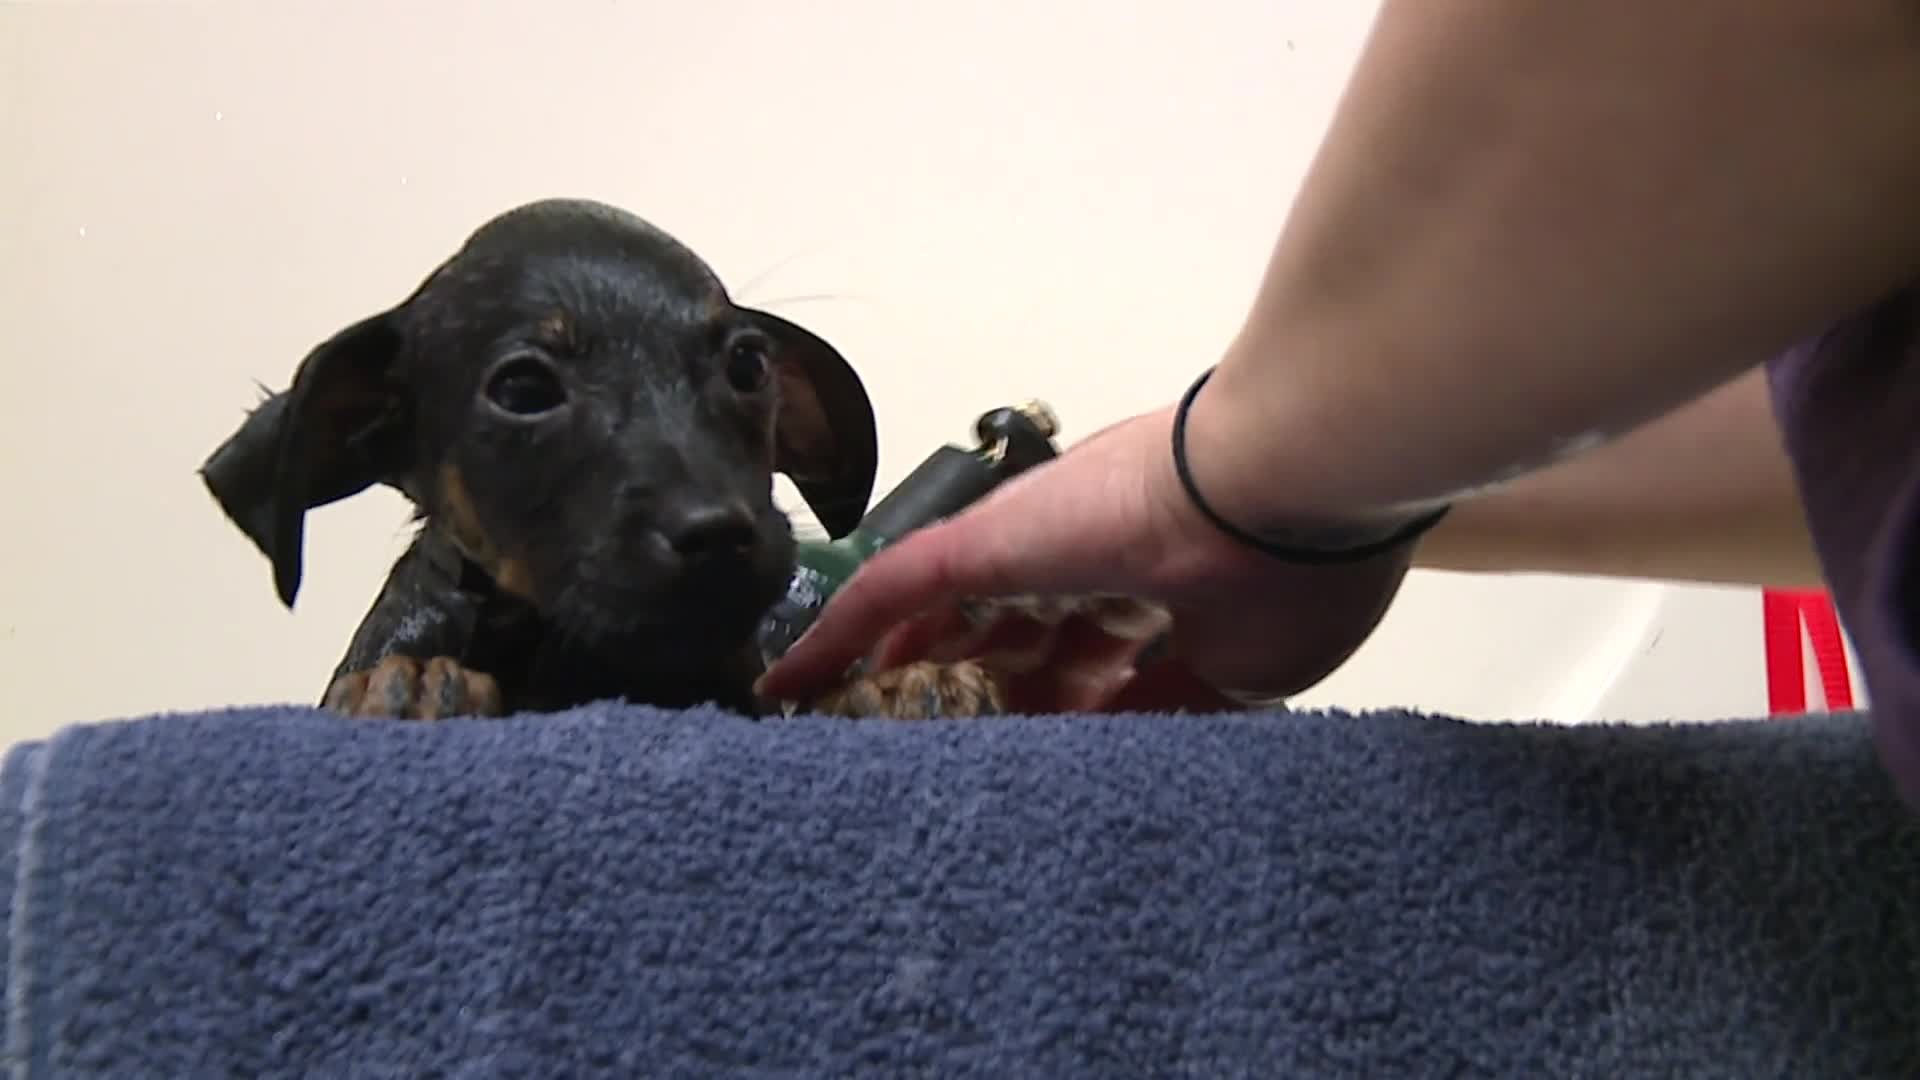 Rescue dogs get a second chance